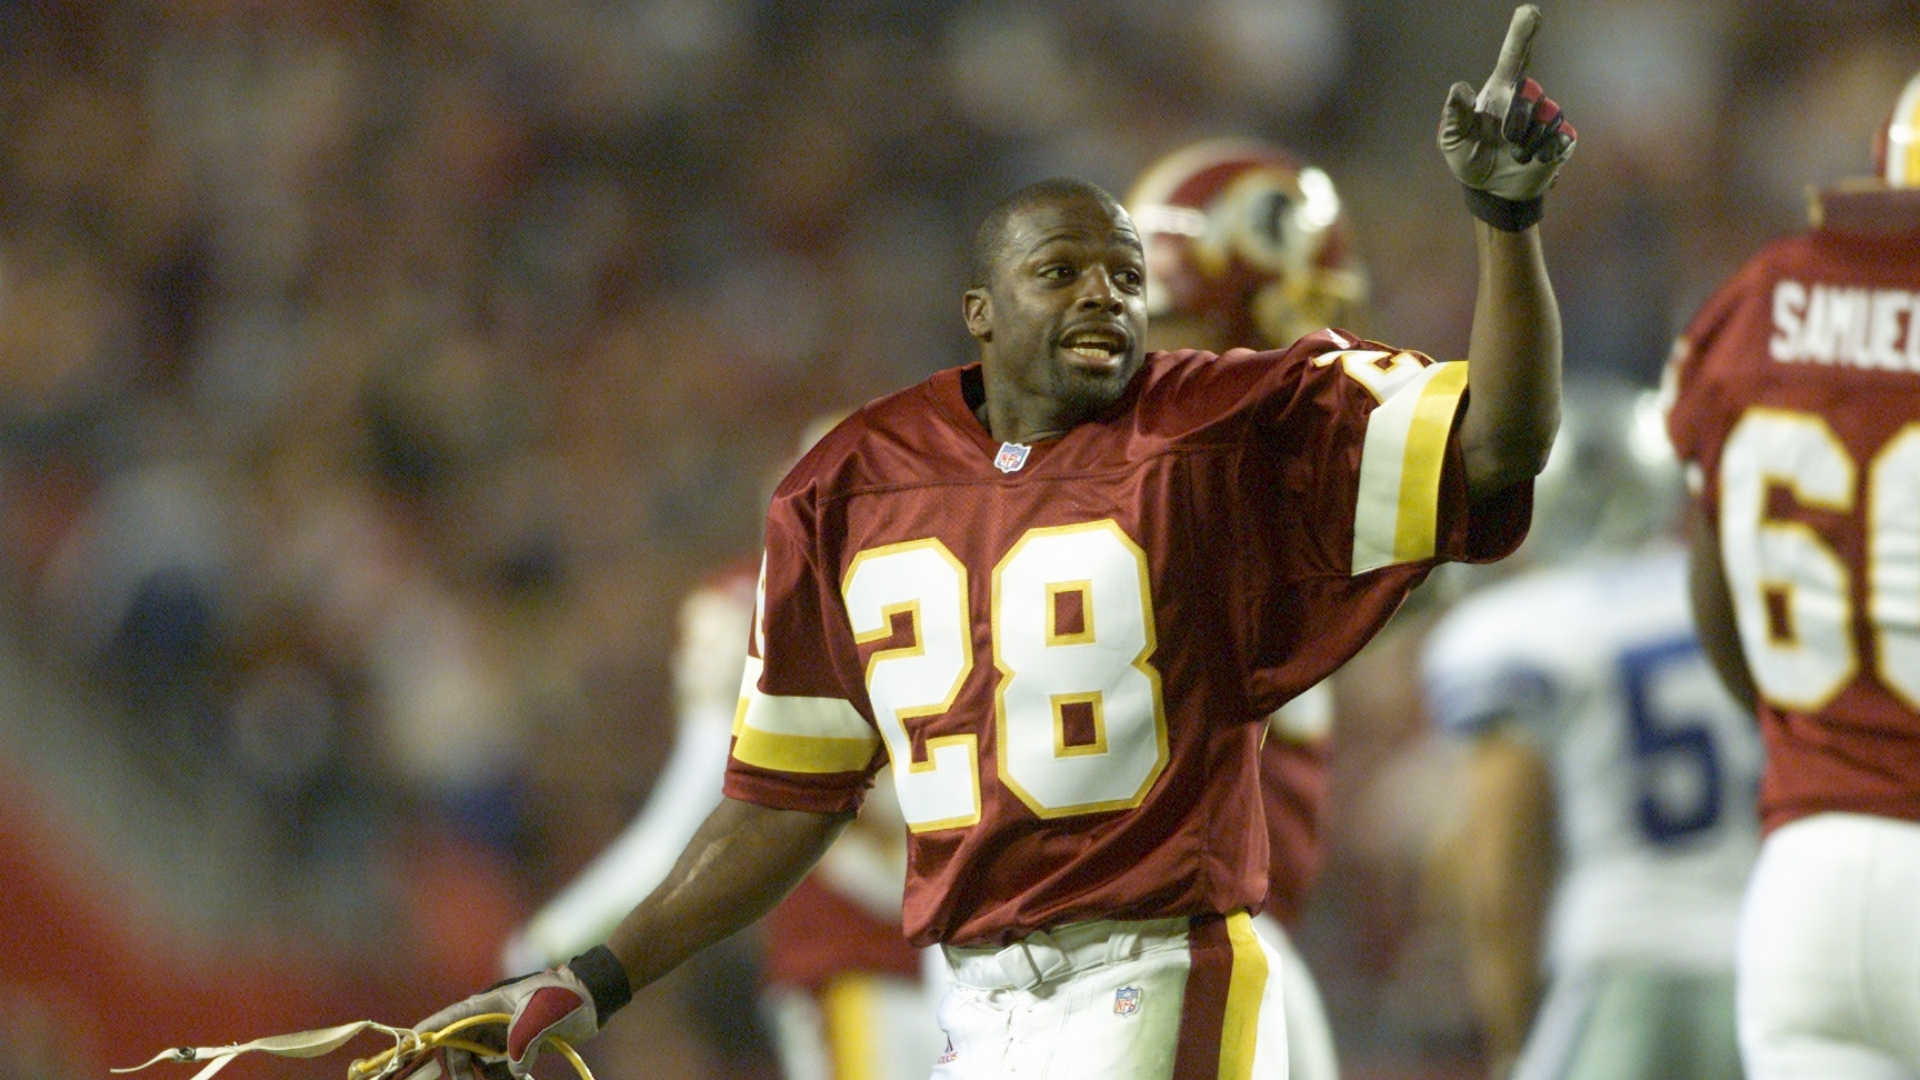 Darrell Green ready to throw away old Washington jerseys for new ones -  Stream the Video - Watch ESPN